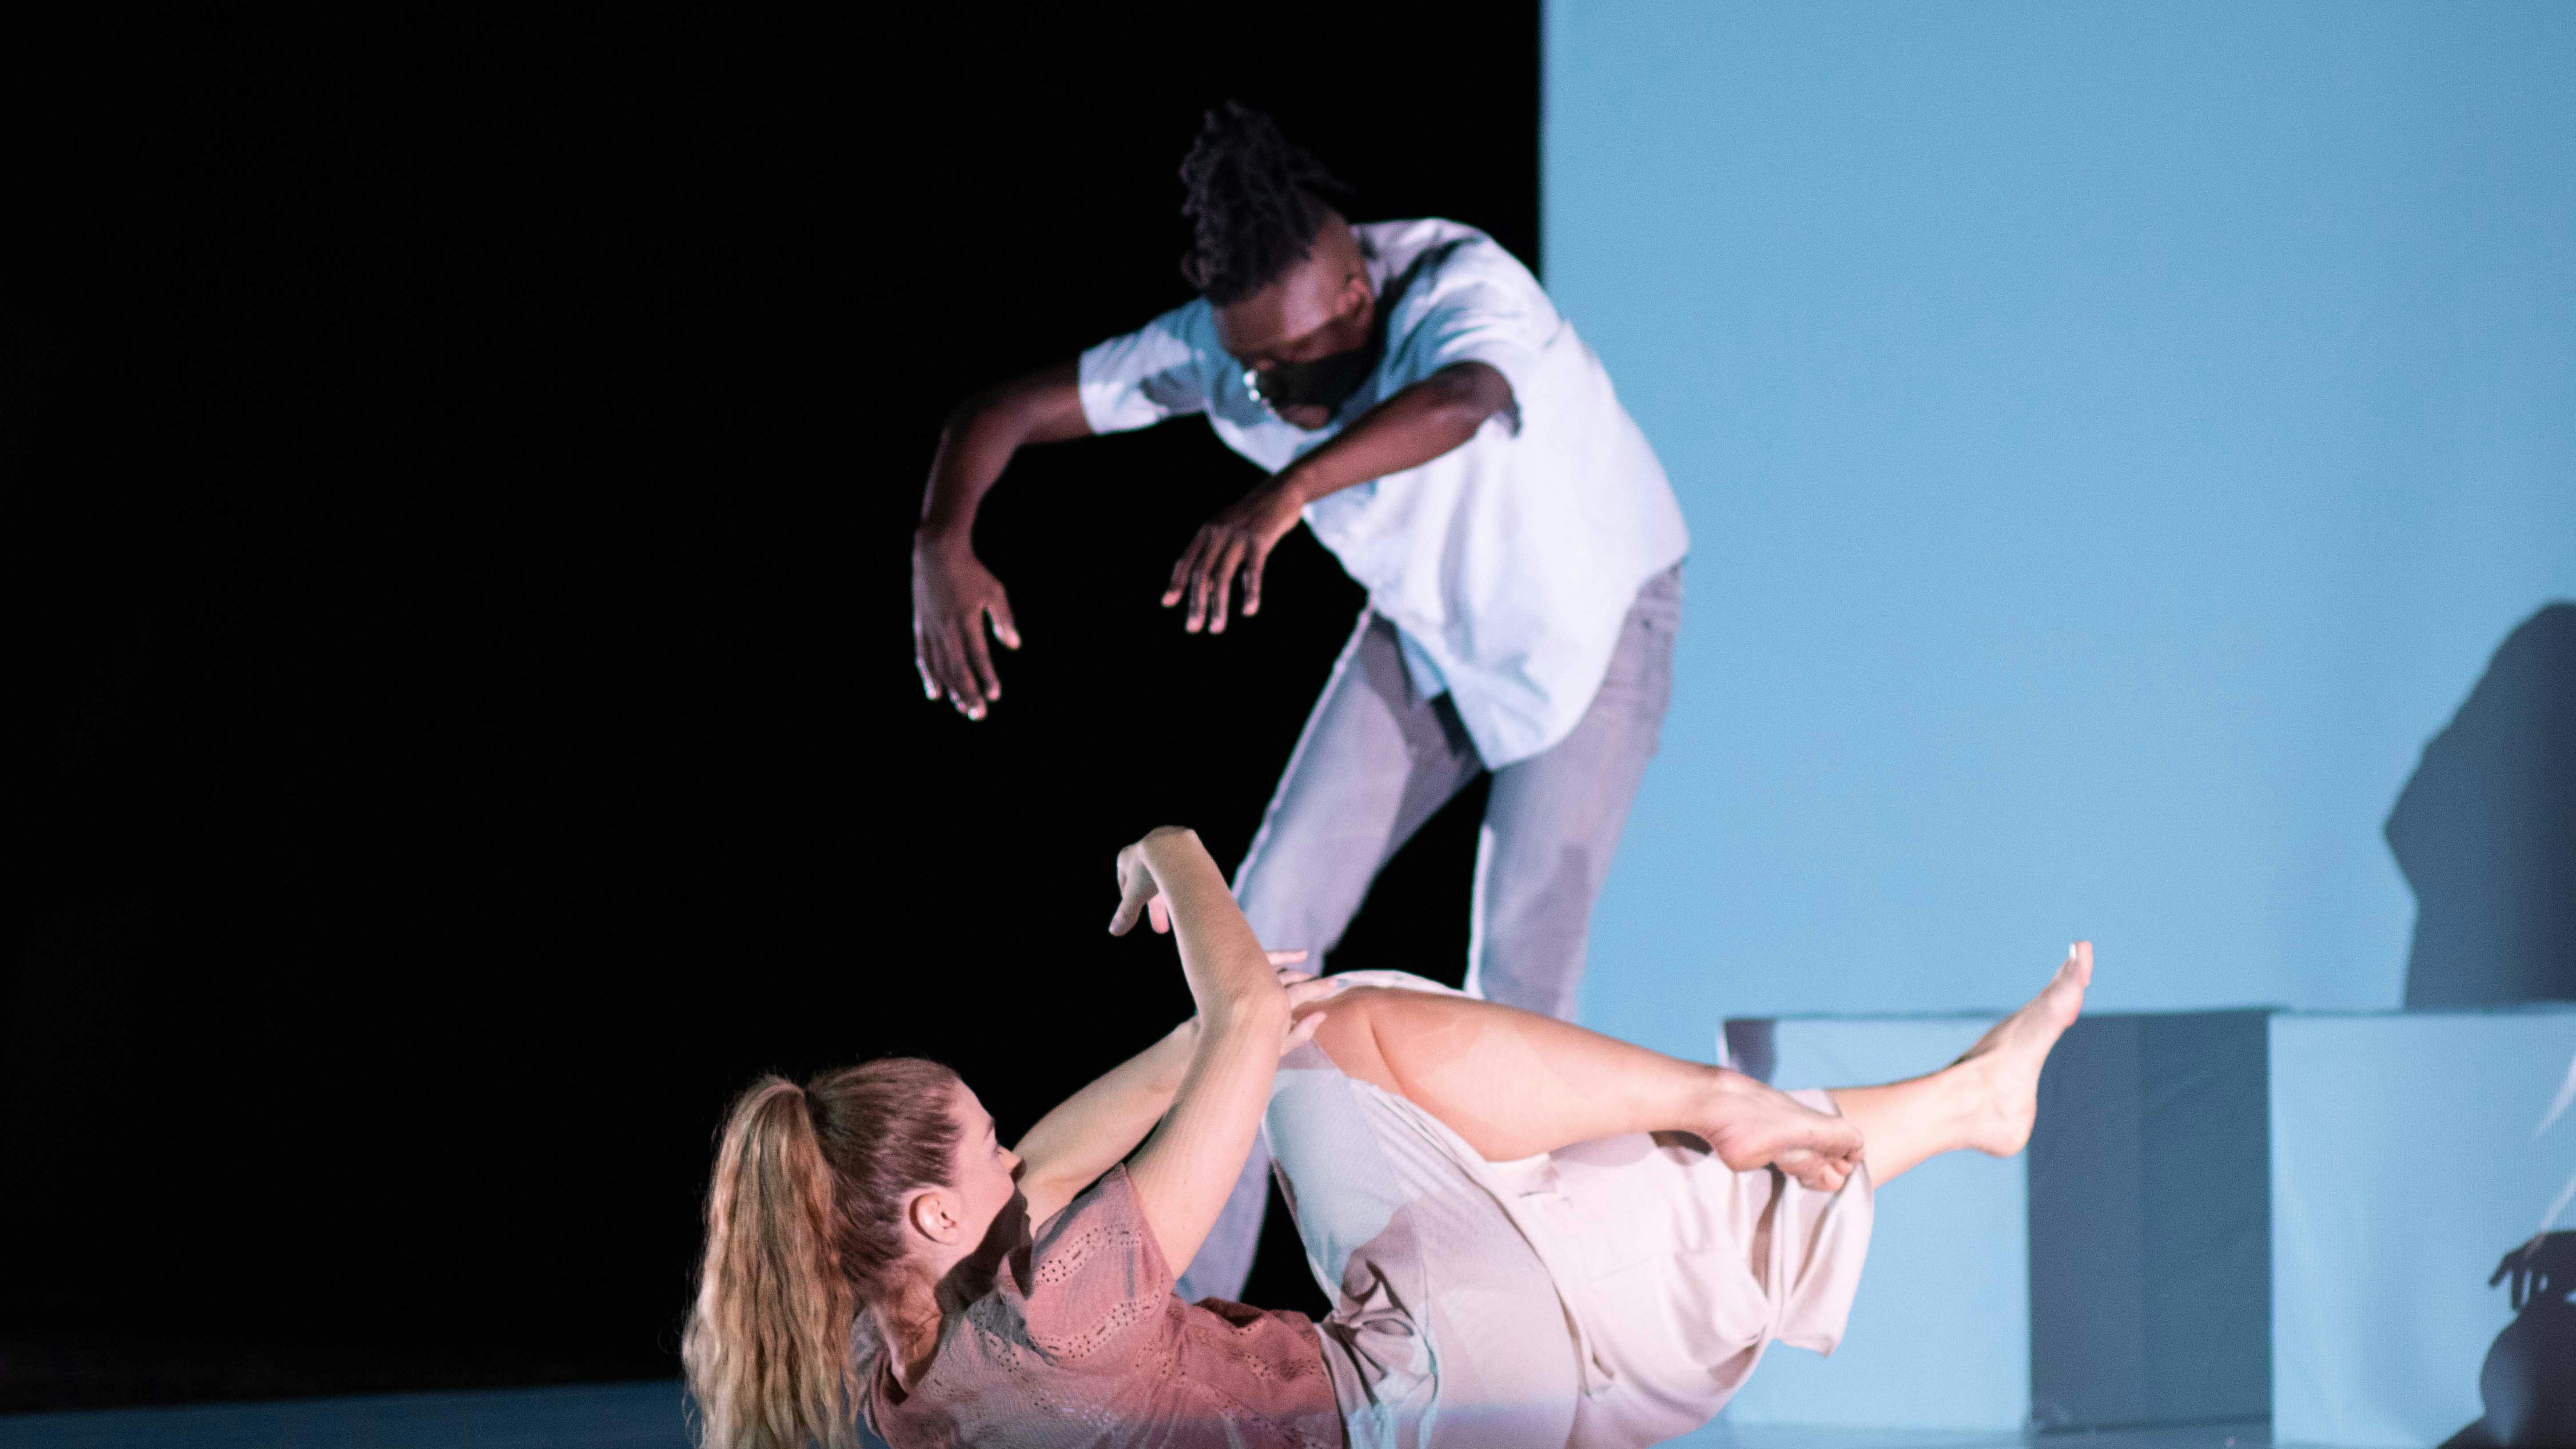 Sarah Bockers and Dodzi Dougban on stage during the preformance Gravity.  She is with her back to the floor, arms and legs raised off the stage; he is standing, with his back in contraction and his arms extended forward.